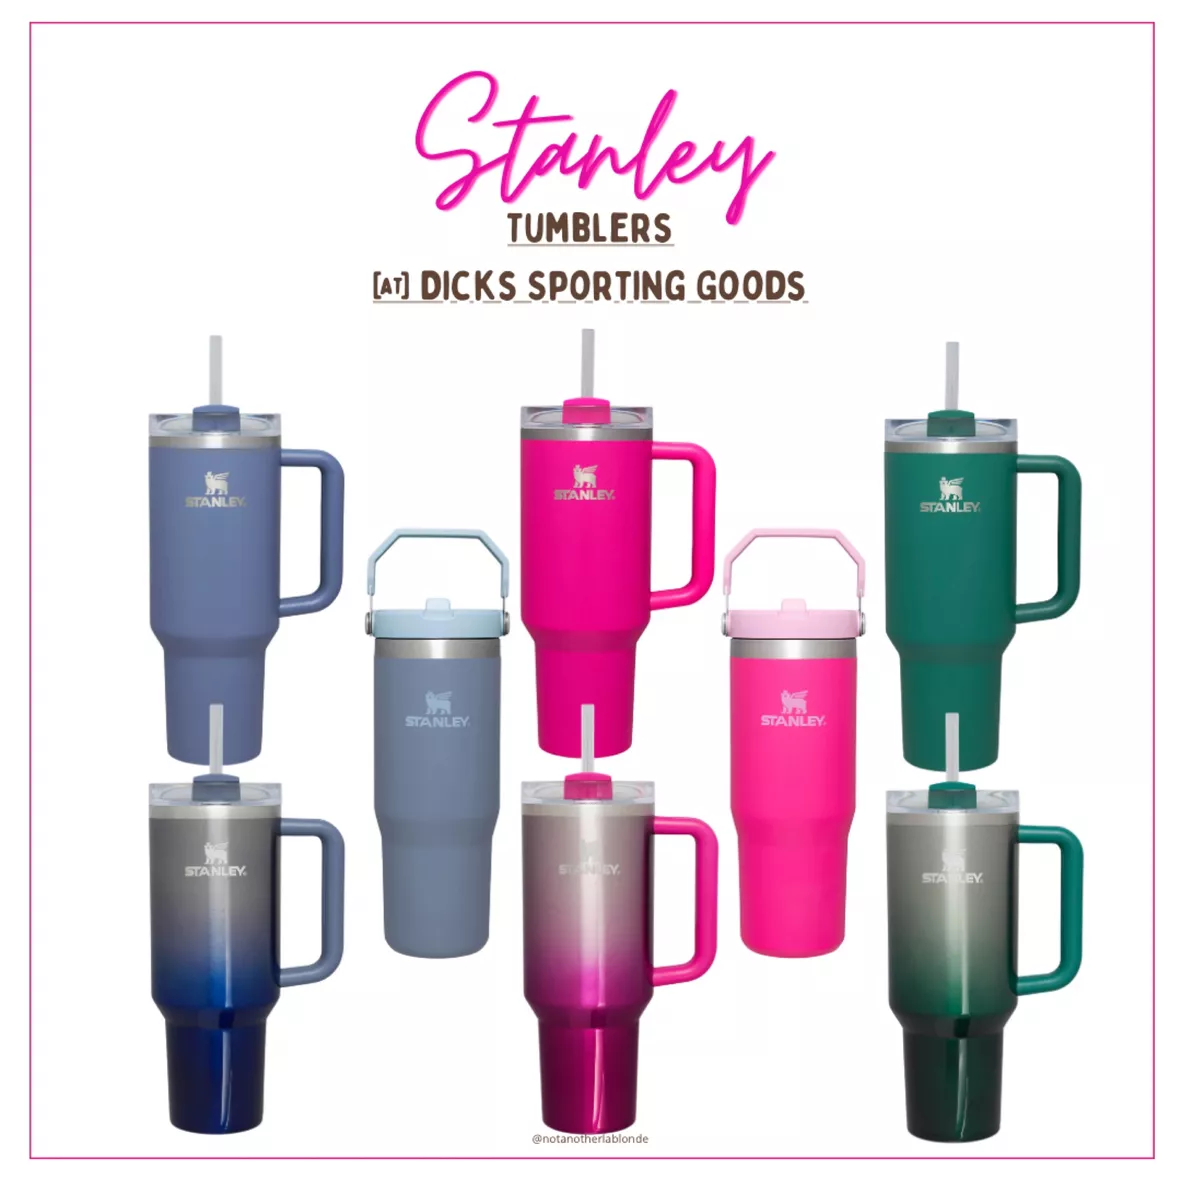 7 new Stanley Quencher colors just dropped at Dick's Sporting Goods